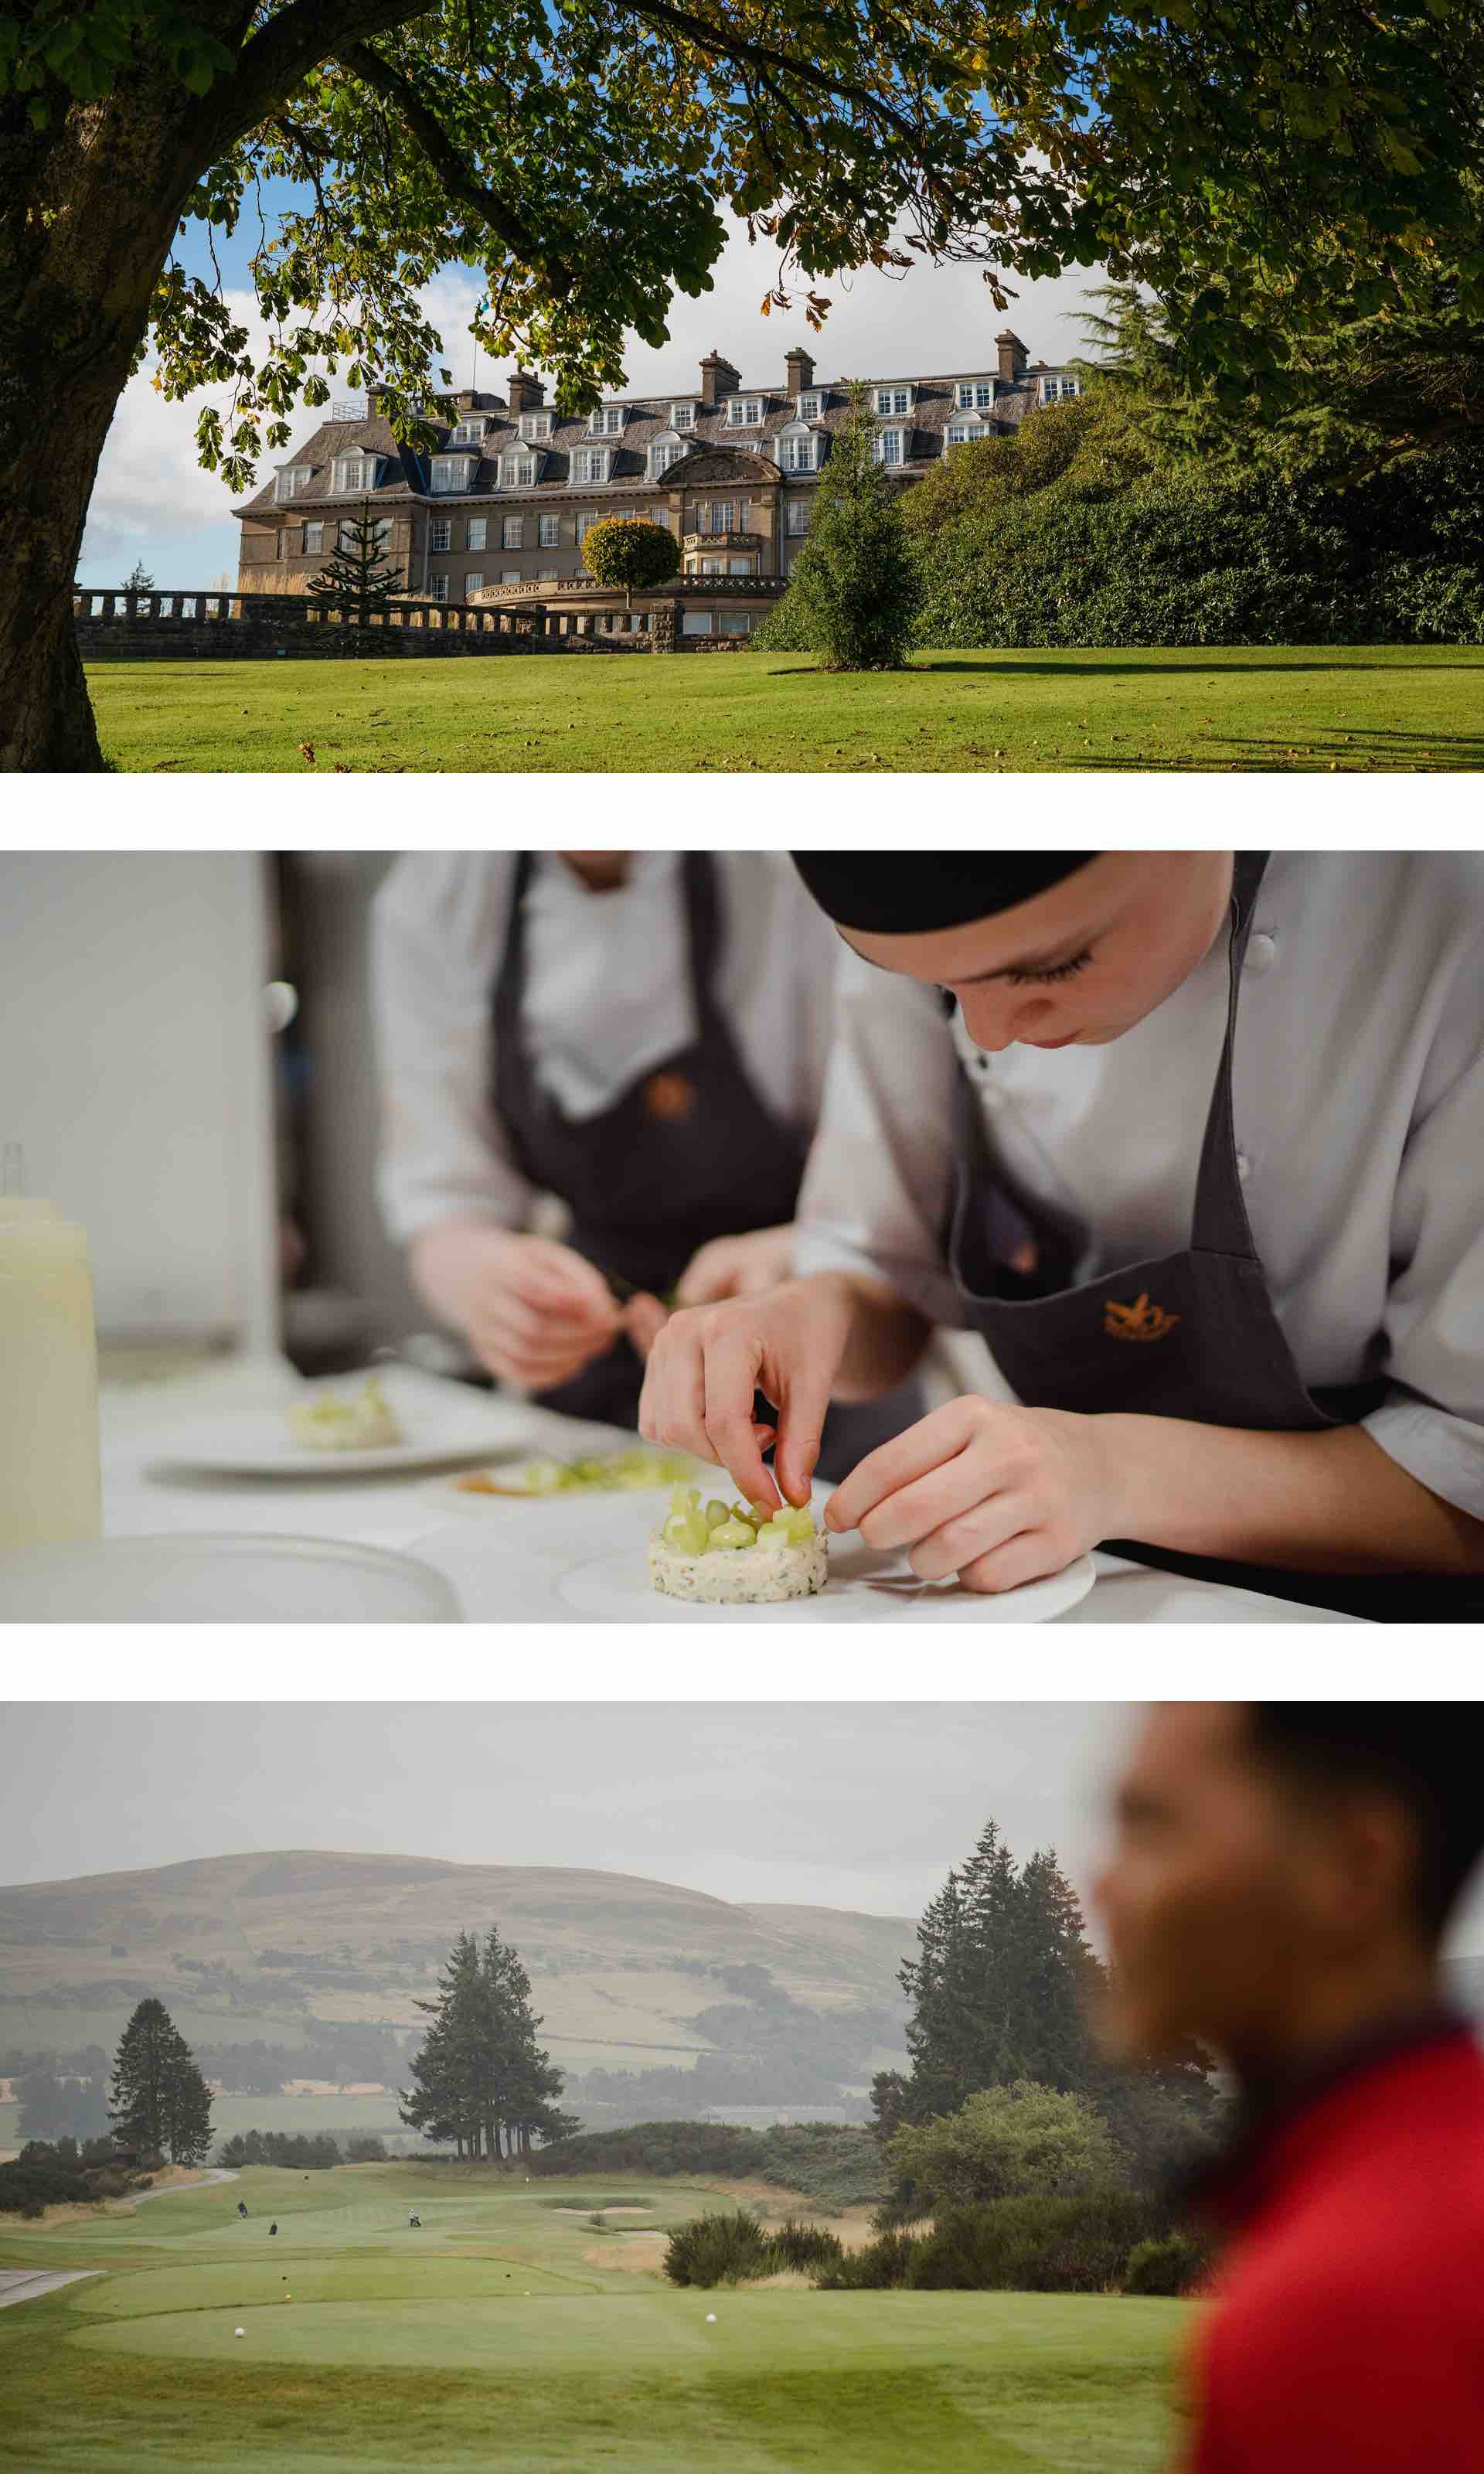 Glenagles hotel building, chefs preparing food and golfers overlooking a golf course.